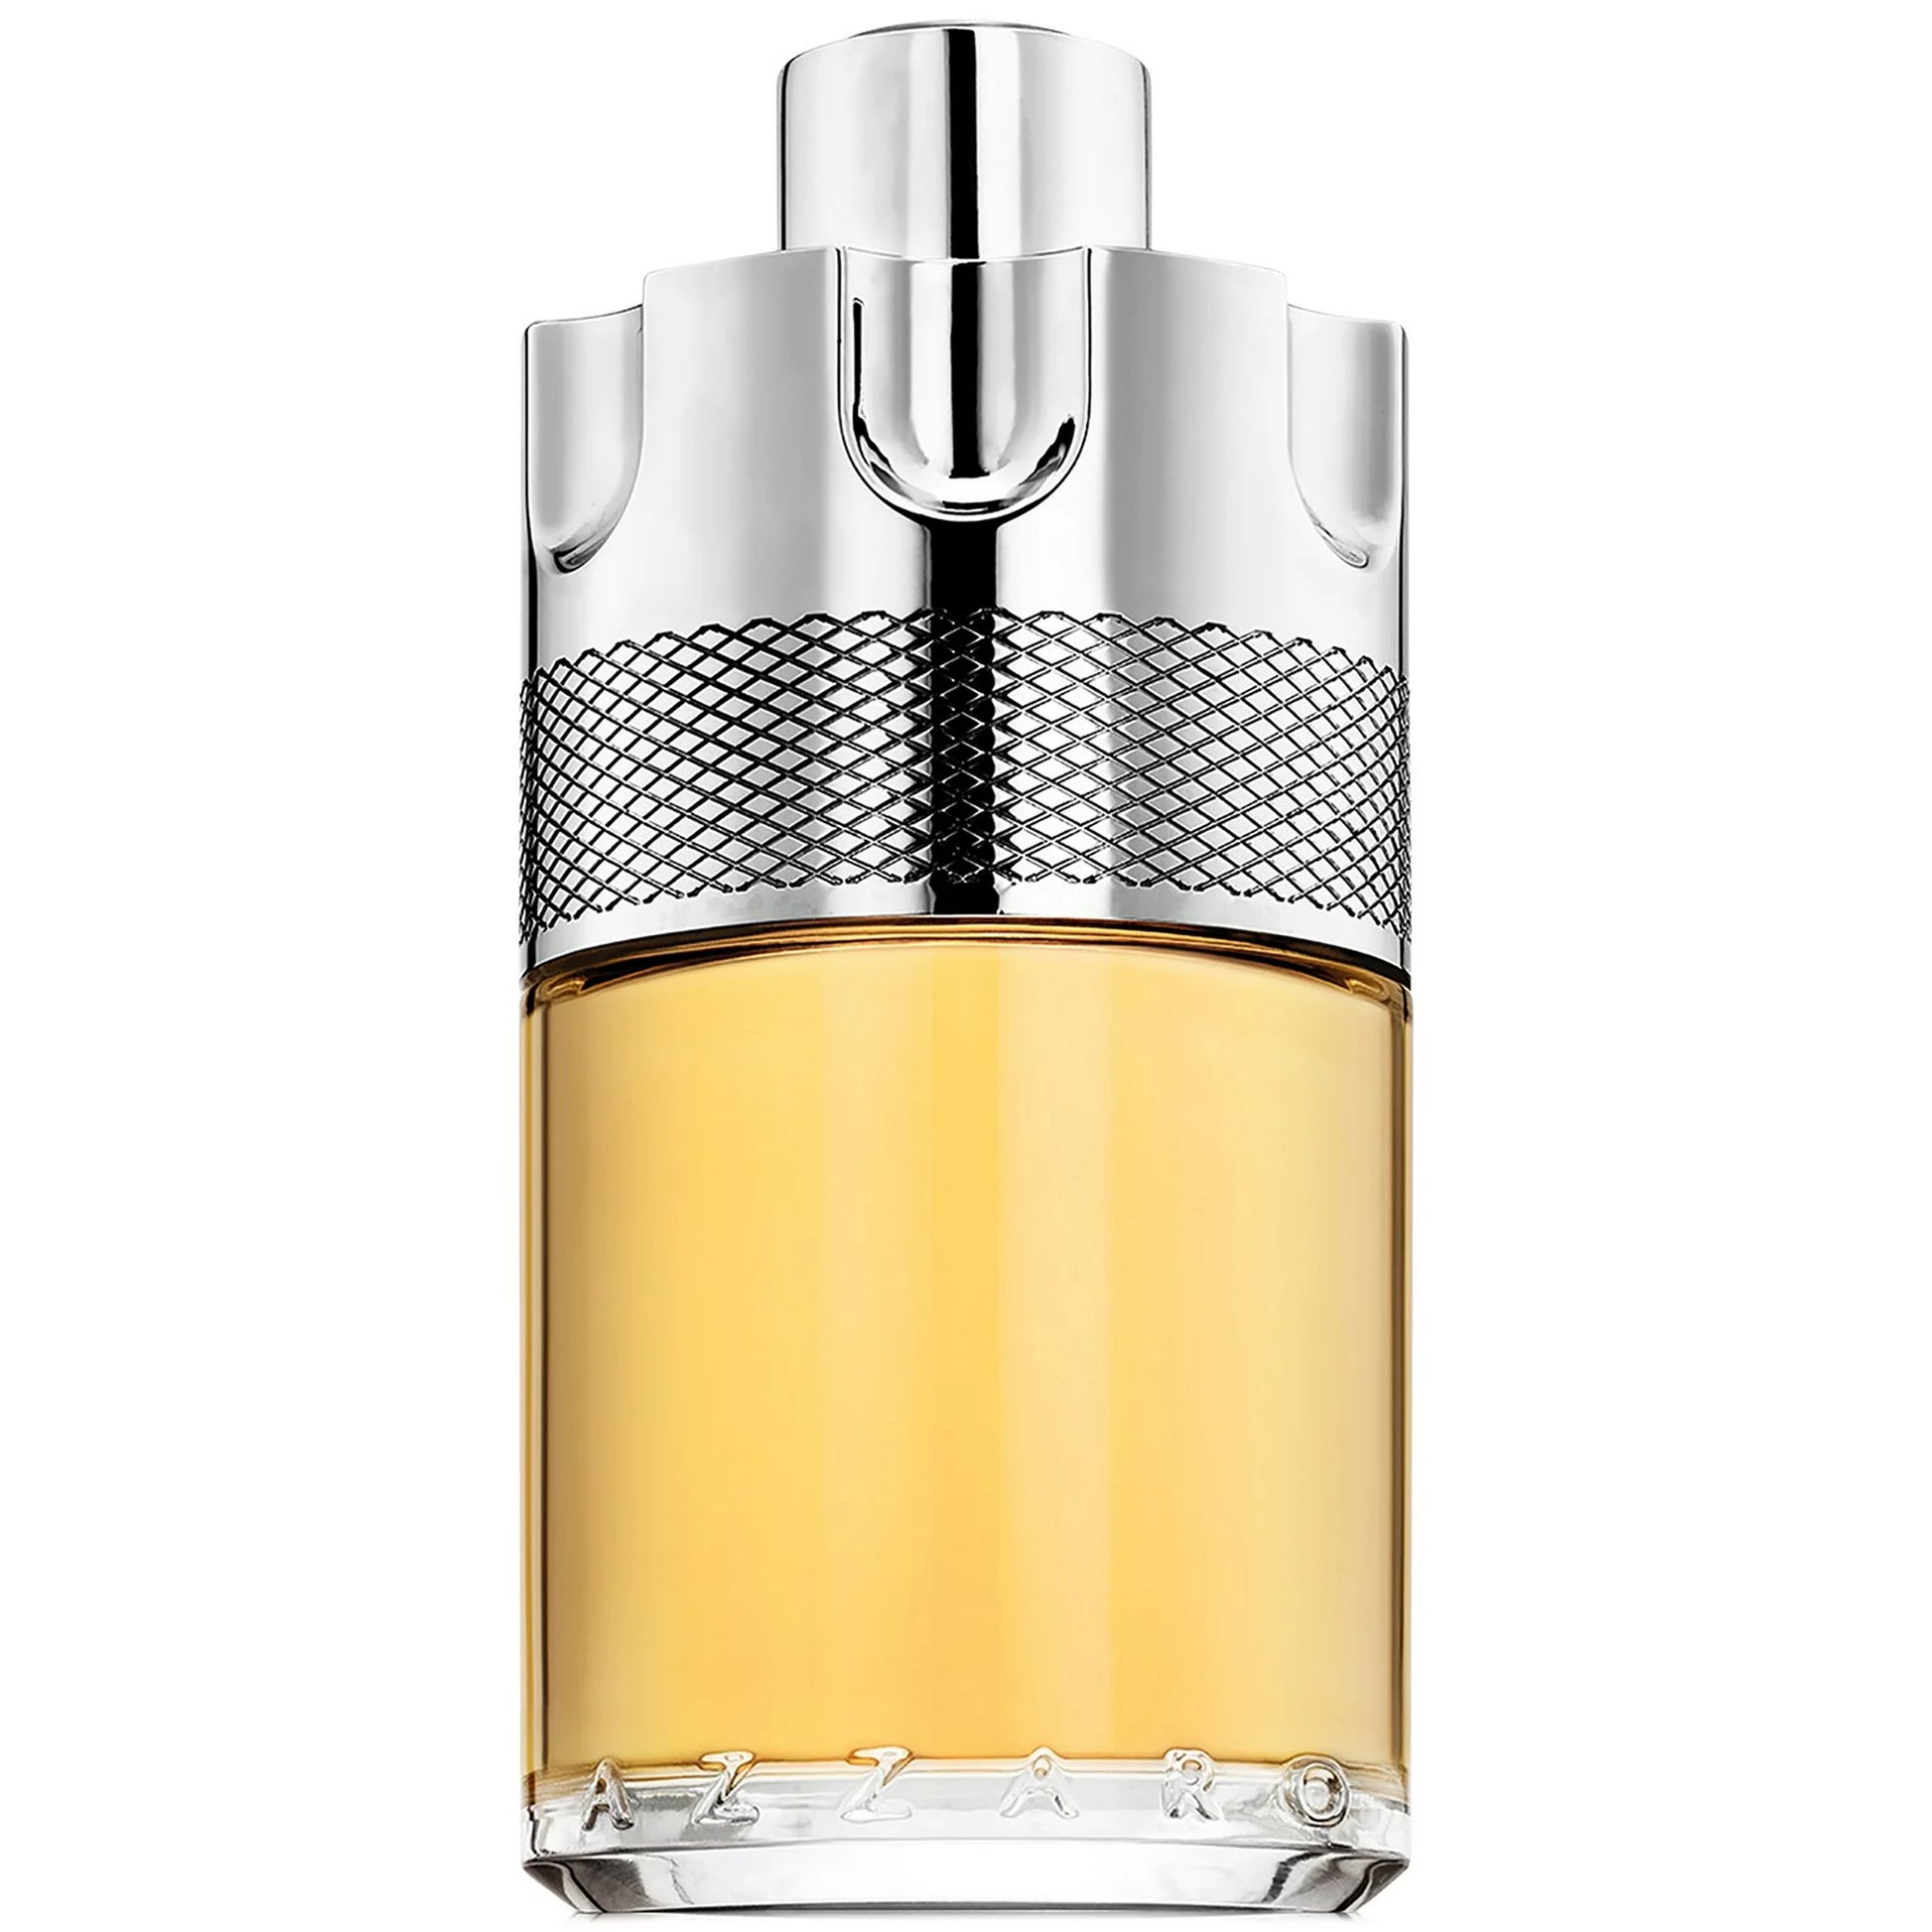 bottle of azzaro wanted cologne in 3.4 oz